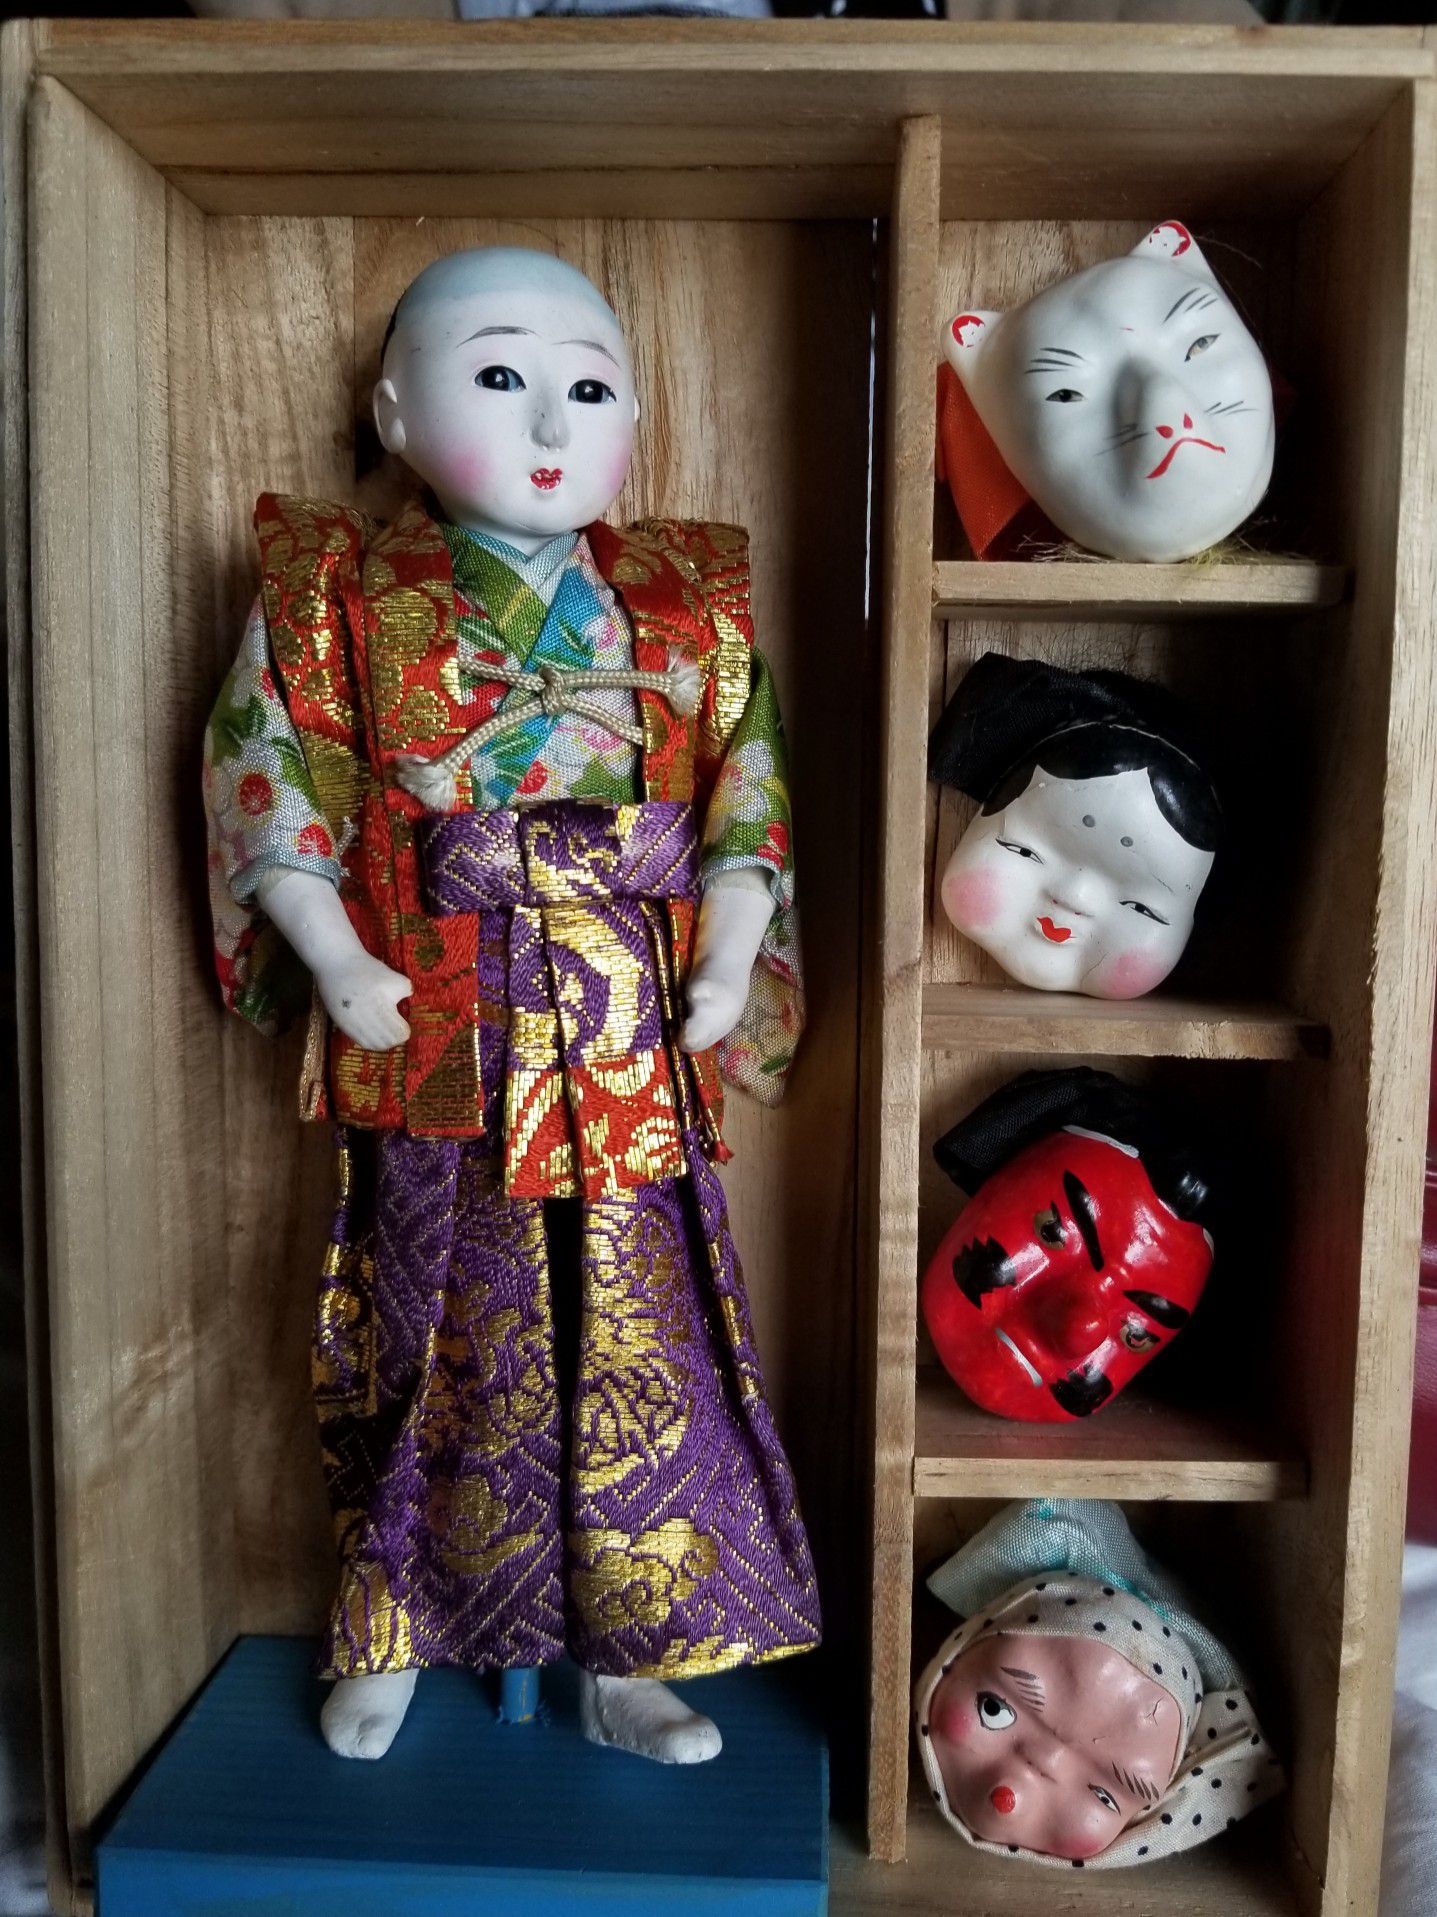 1950s Japanese mask dance doll in porcelain with exchangeable masks